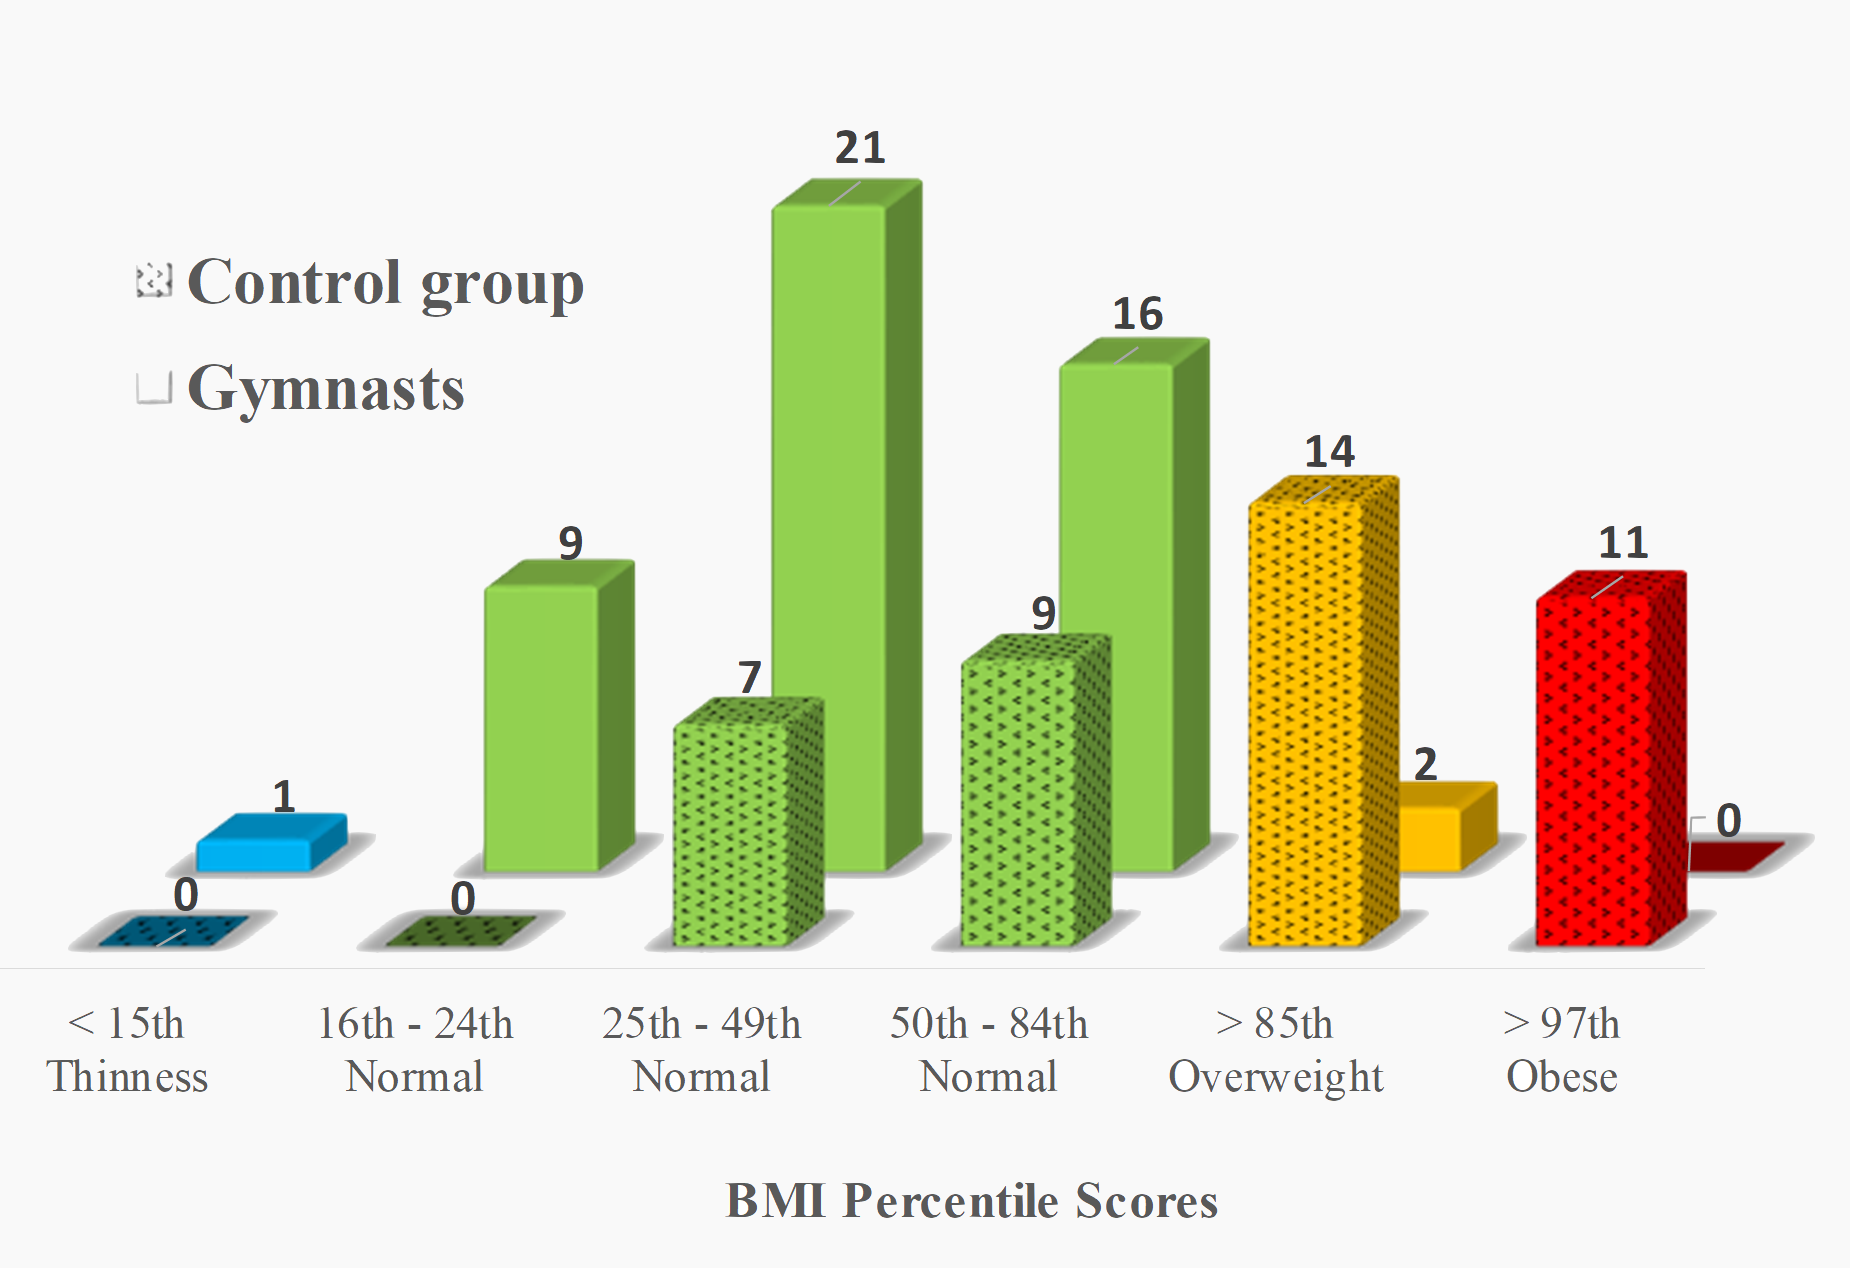 Distribution of the BMI percentile scores in the artistic gymnasts